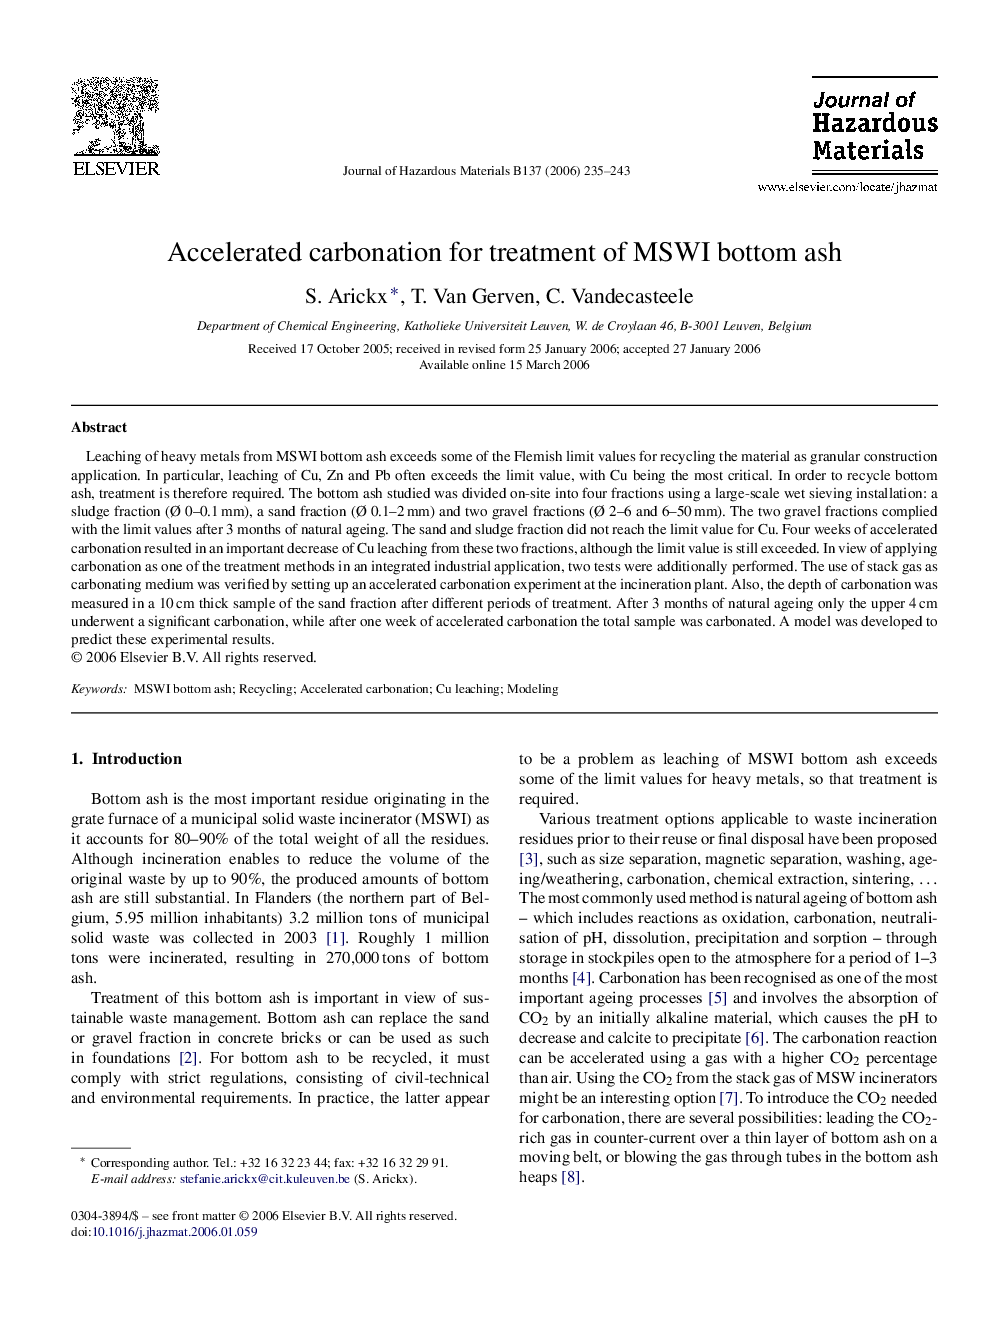 Accelerated carbonation for treatment of MSWI bottom ash